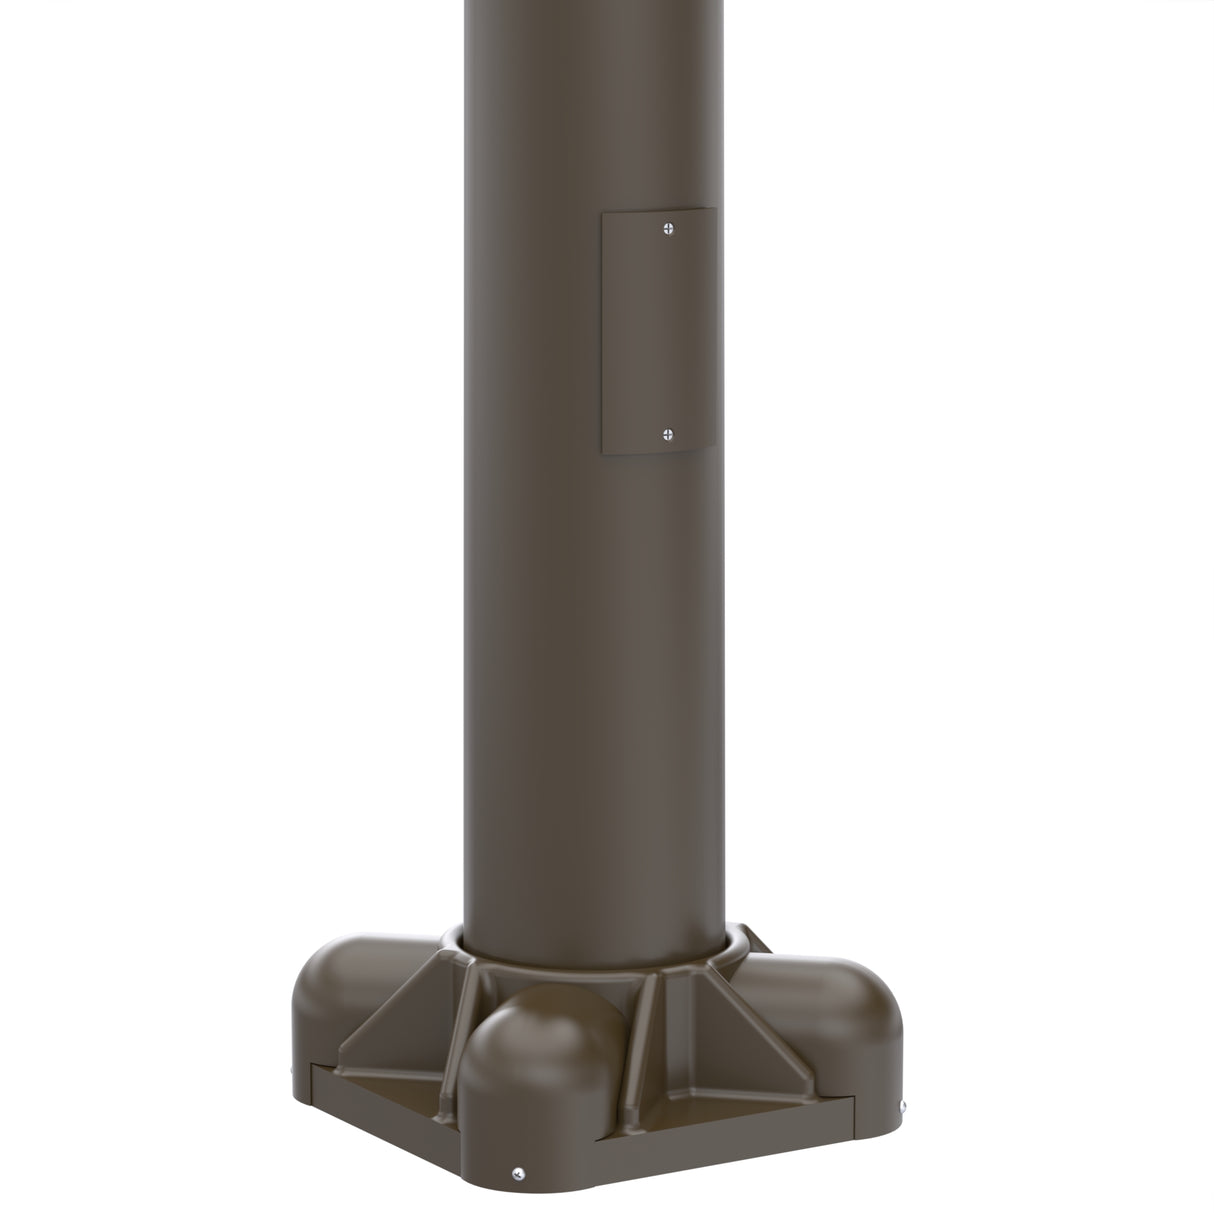 14' Tall x 5.0" Base OD x 3.0" Top OD x 0.125" Thick, Round Tapered Aluminum, Anchor Base Light Pole